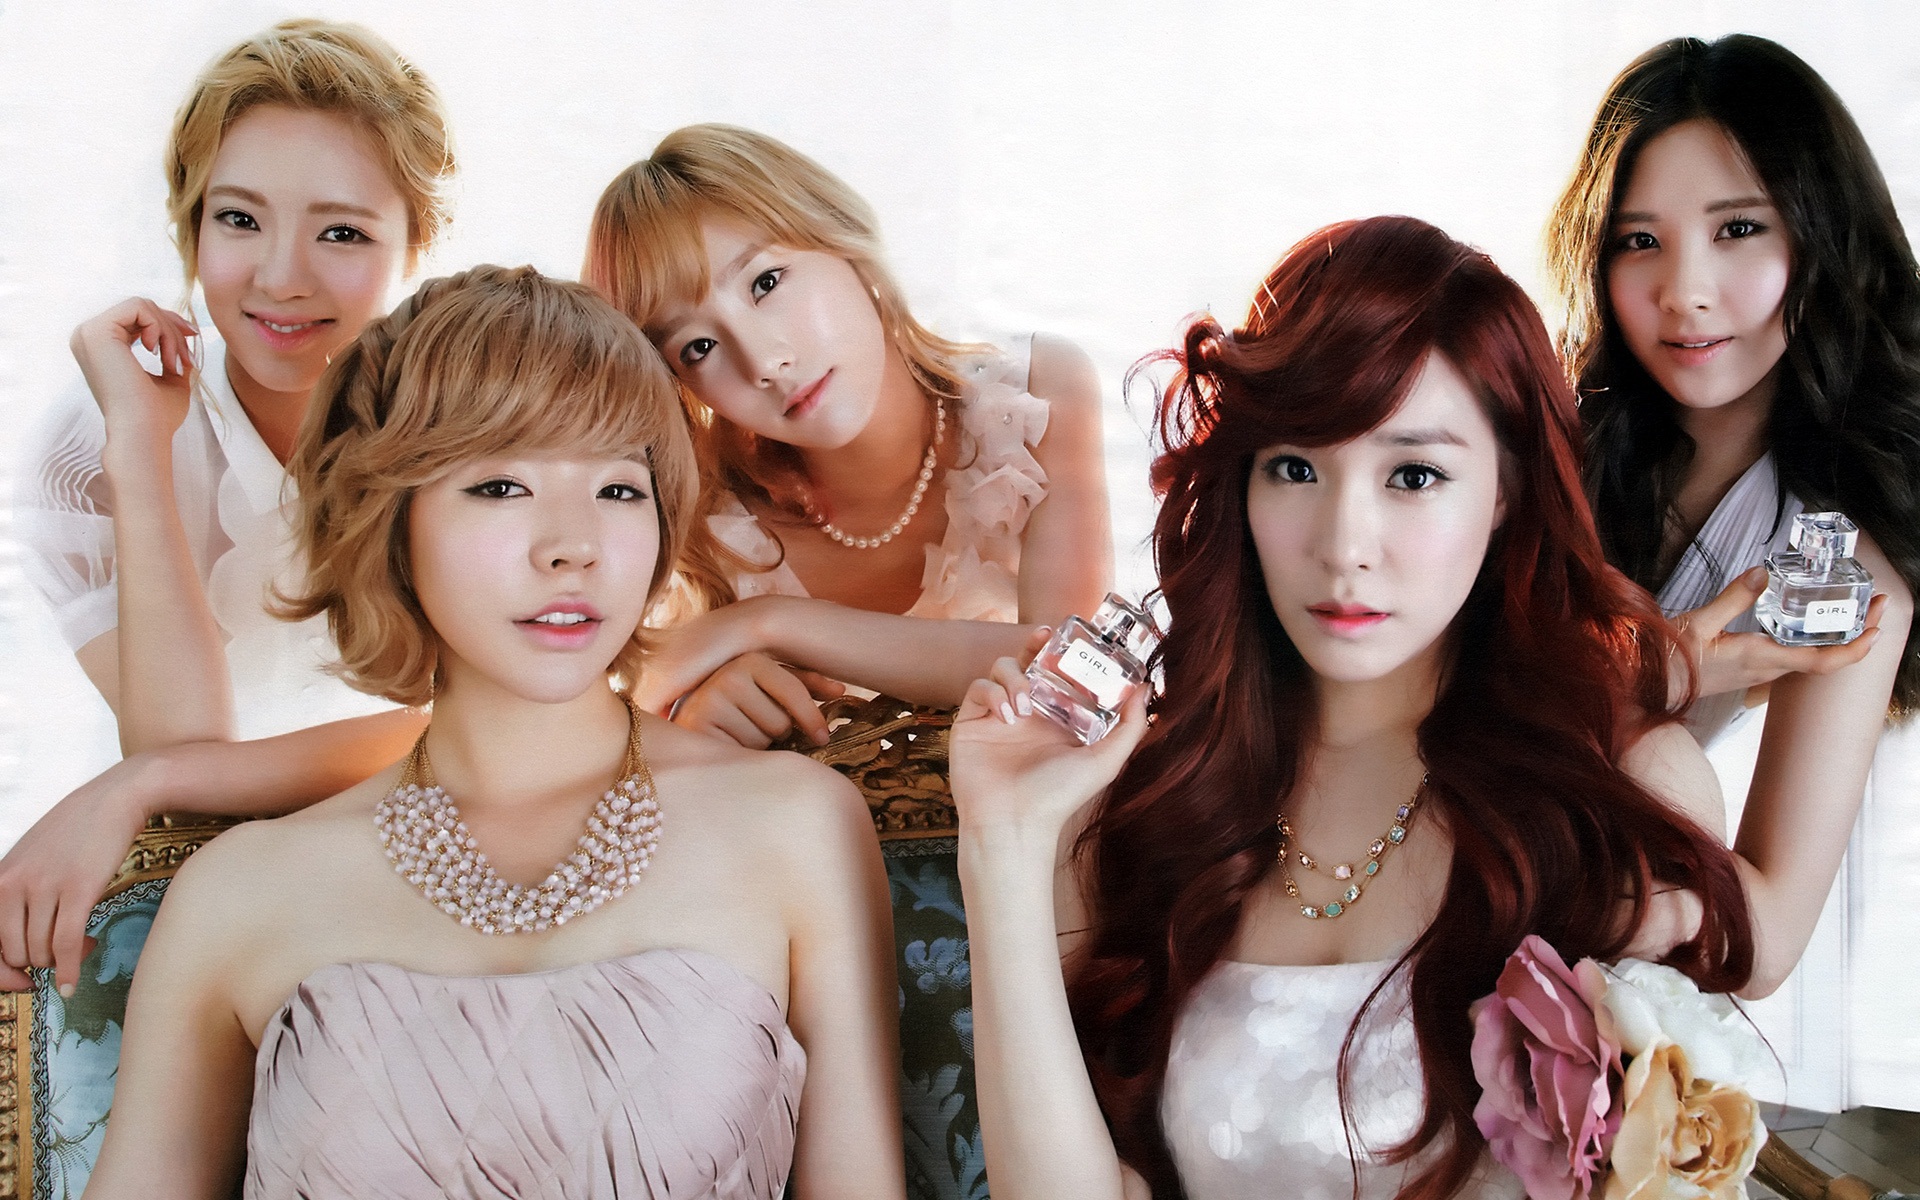 Girls Generation latest HD wallpapers collection #4 - 1920x1200